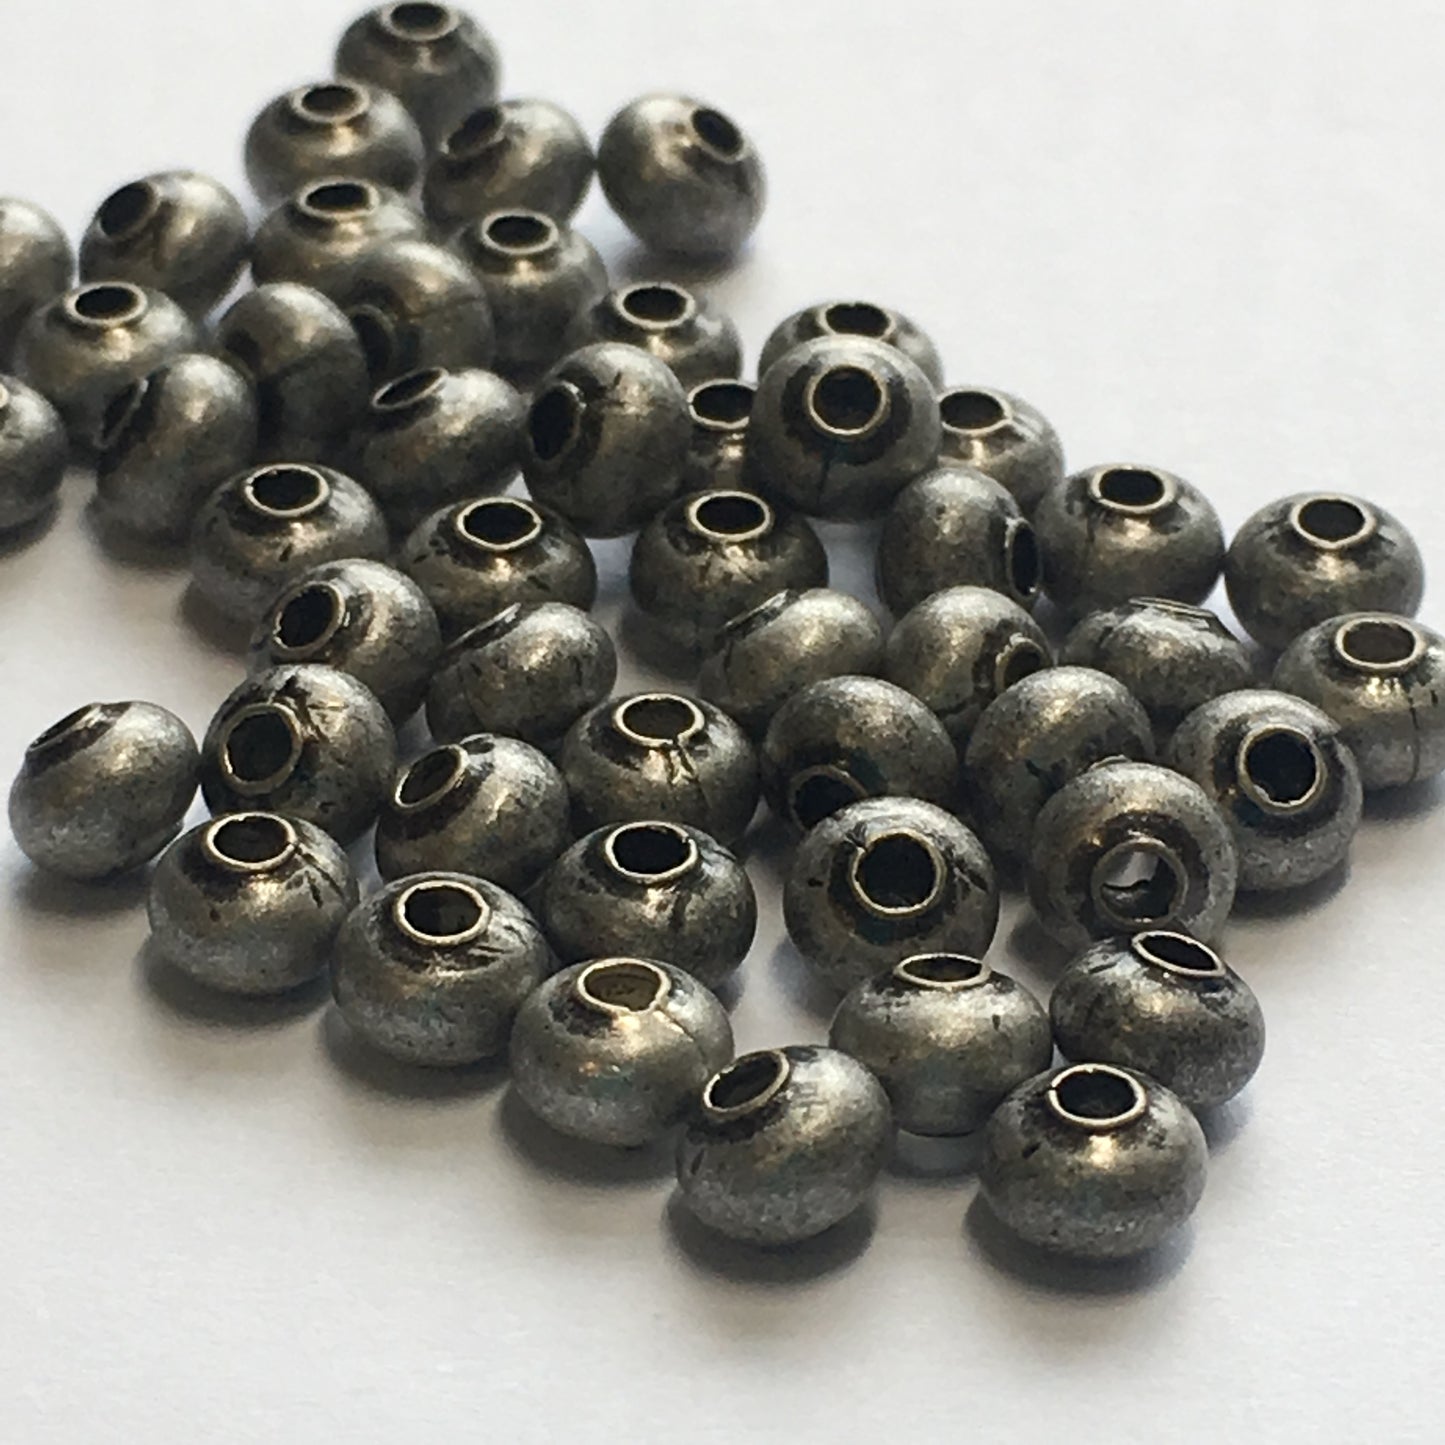 Antique Pewter Finish Smooth Saucer Beads, 4.5 x 3.2 mm - 50 Beads